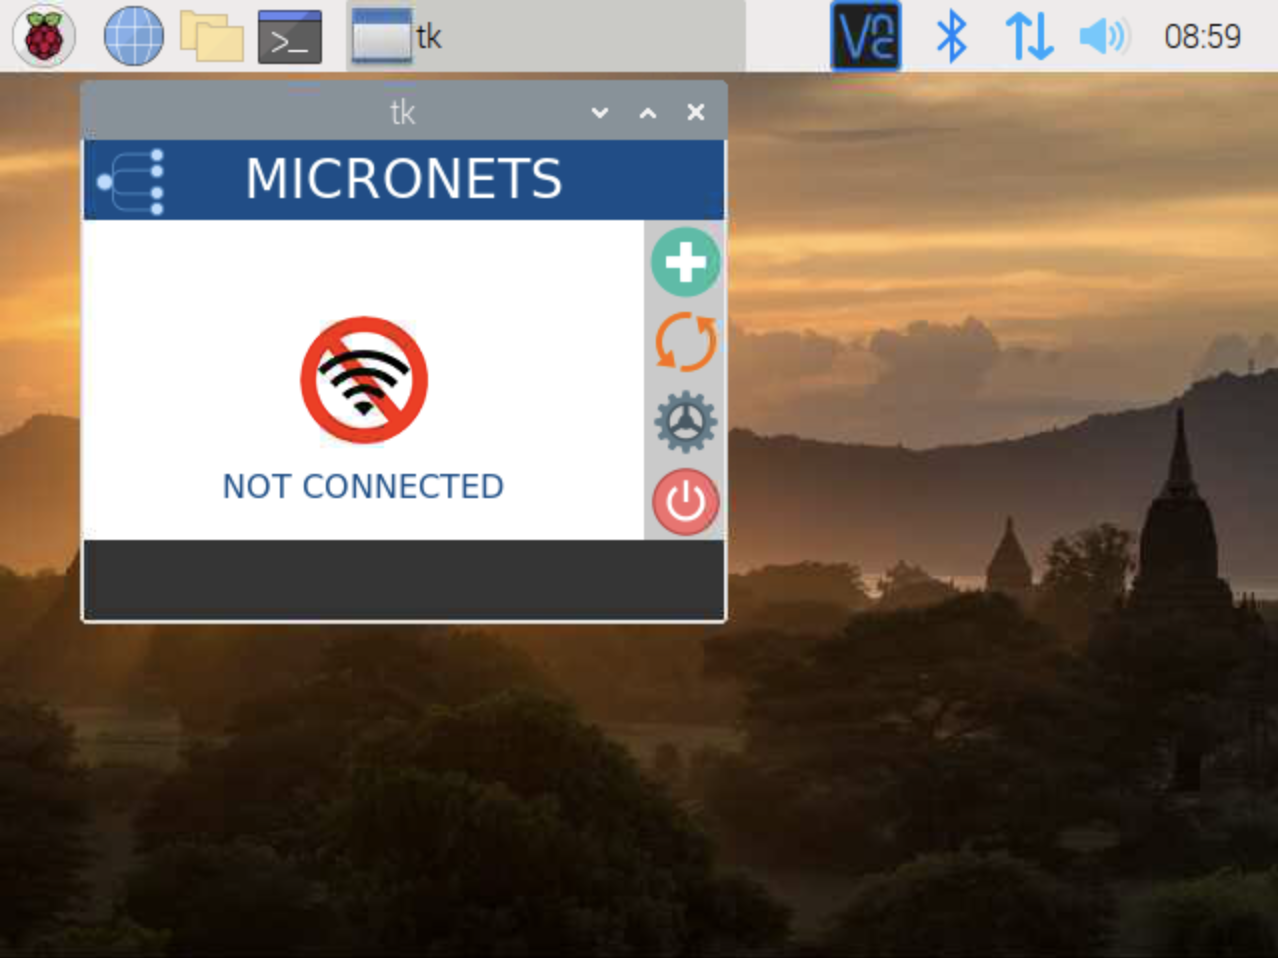 This image shows the Micronets Proto-Pi app being used on the Raspberry Pi.